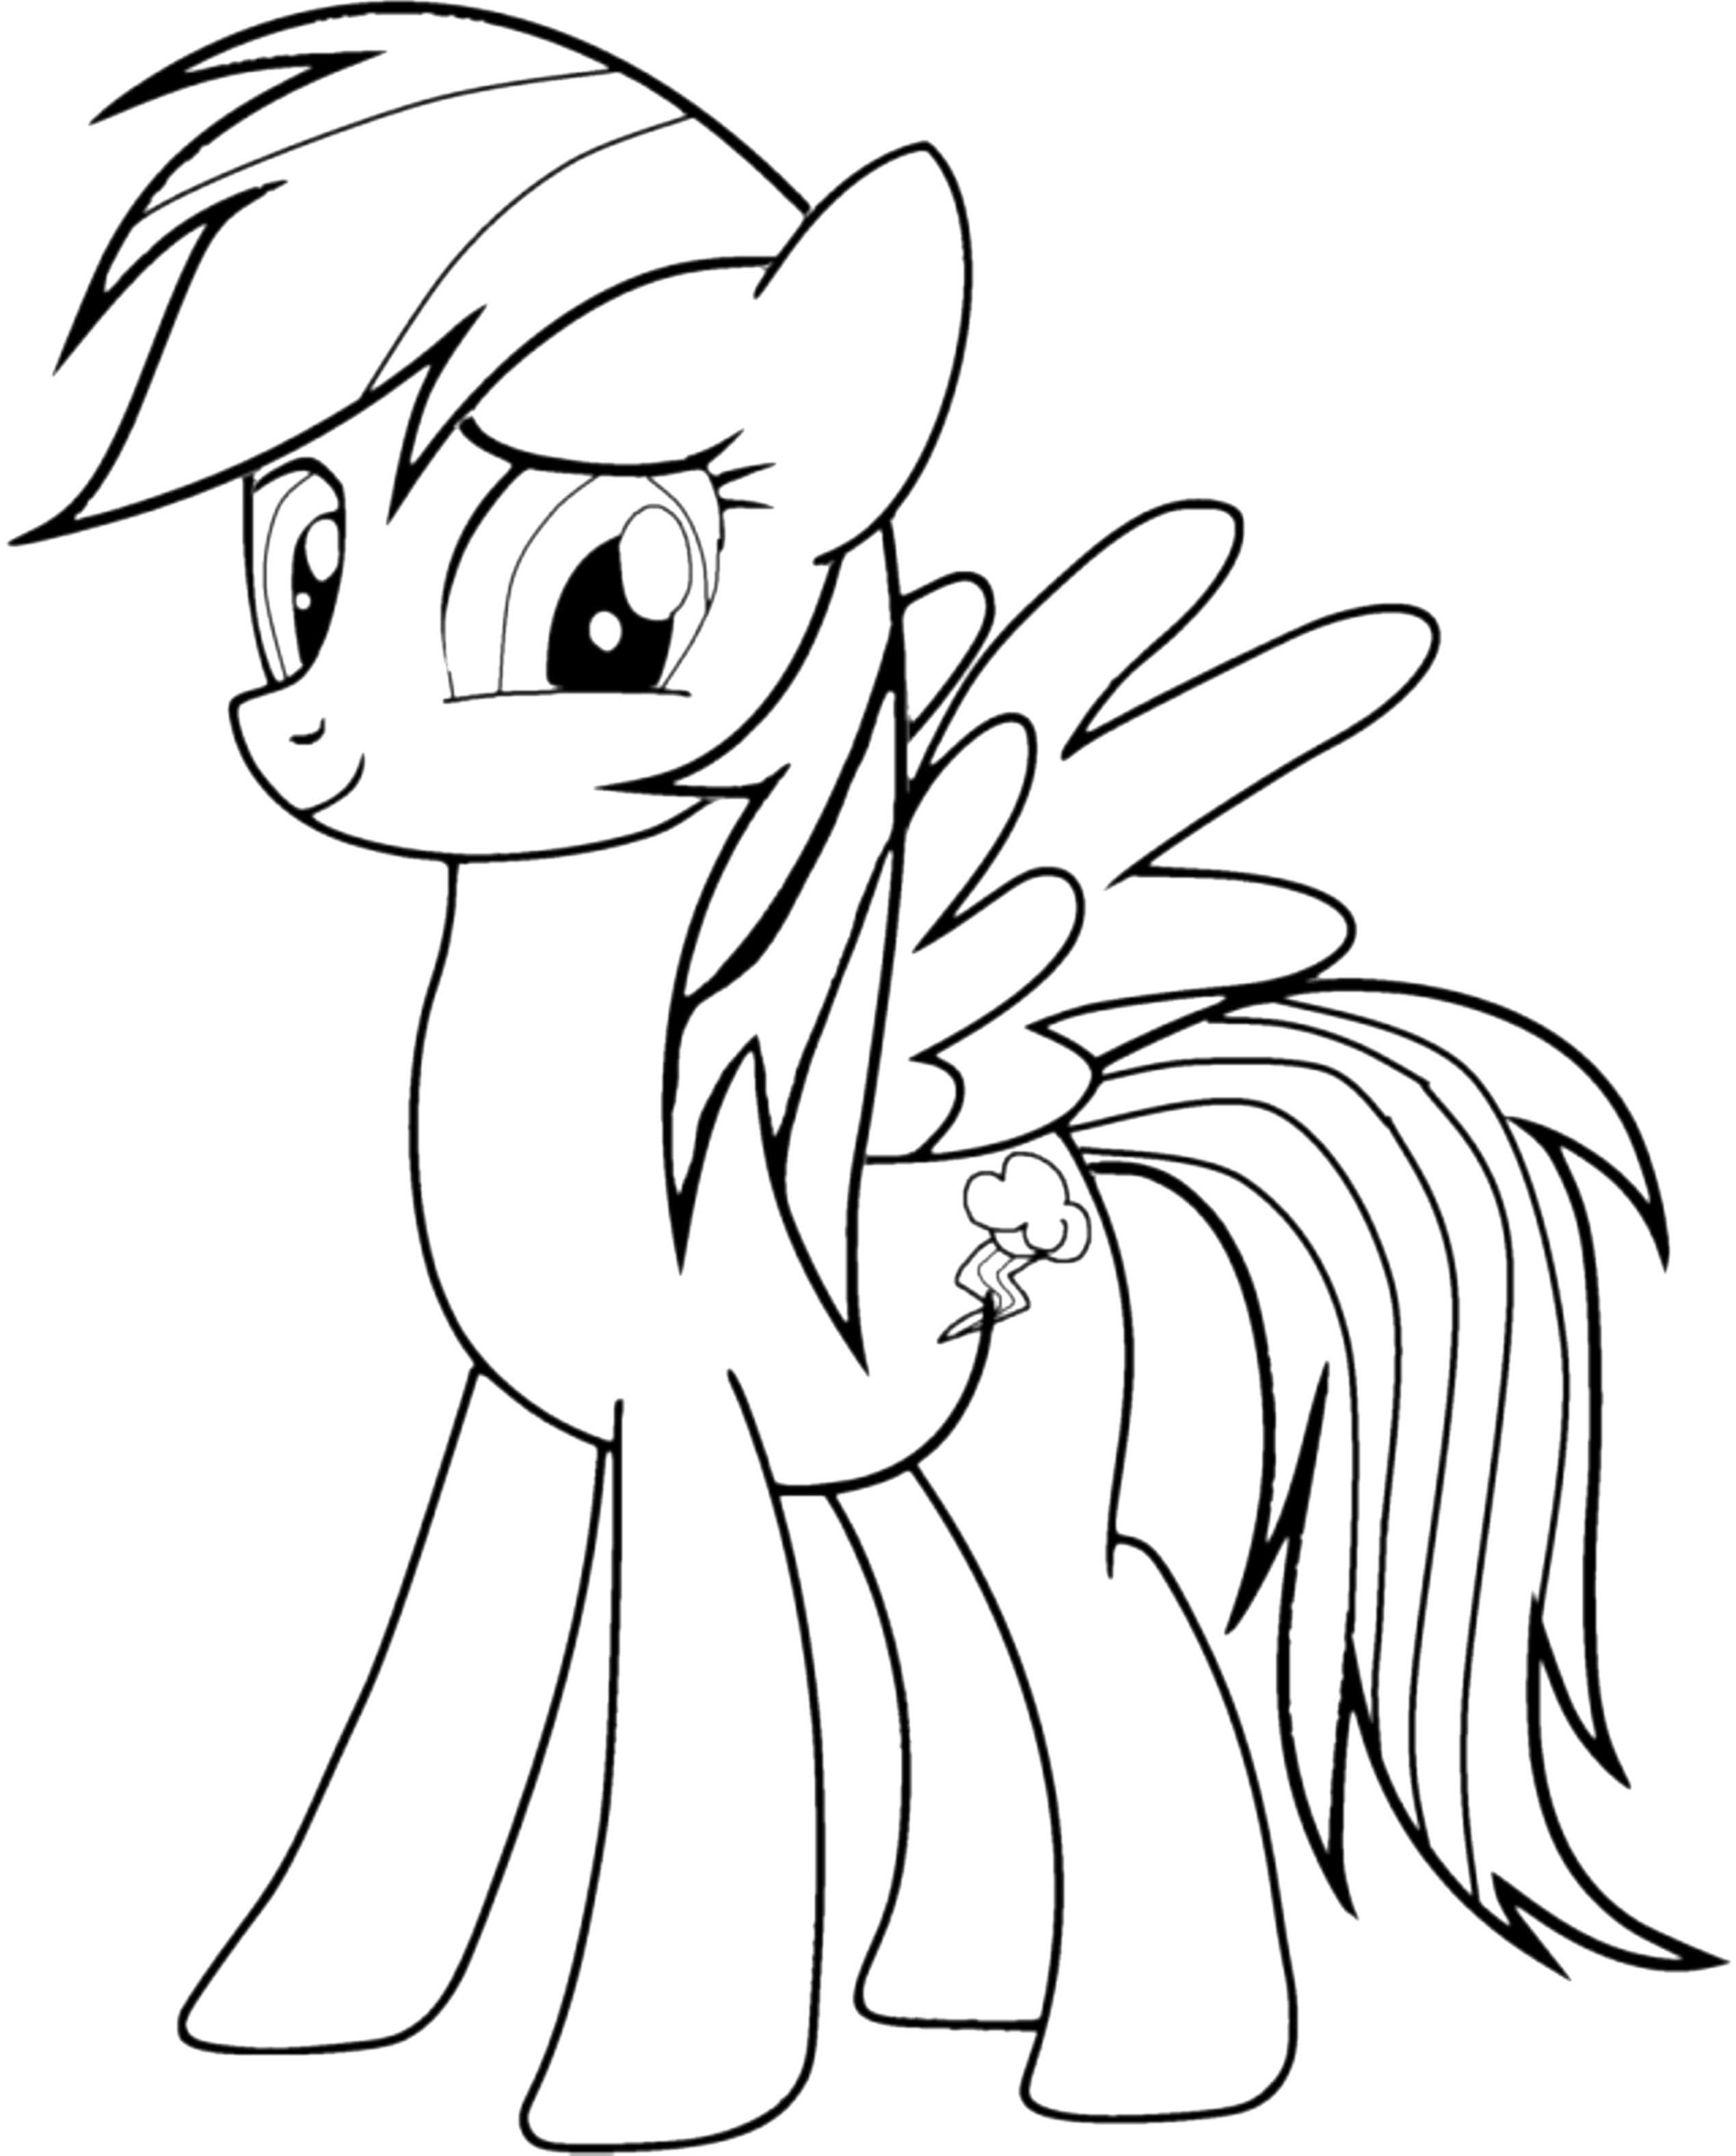 Rainbow Dash Coloring Pages   Best Coloring Pages For Kids ...